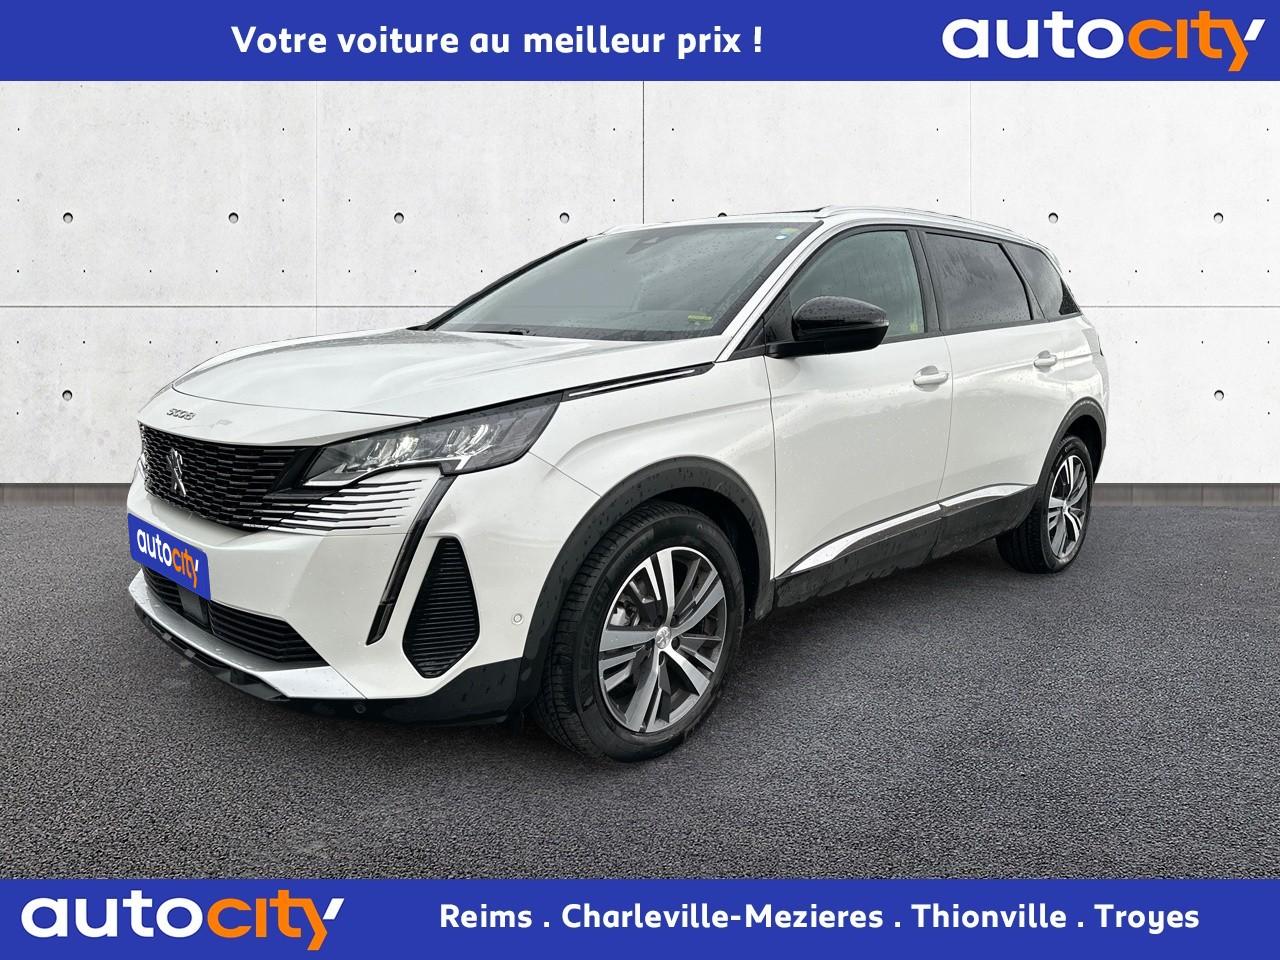 PEUGEOT-5008- 1.5 BlueHDi S&S - 130 - BV EAT8  II 2017 Allure Pack PHASE 2